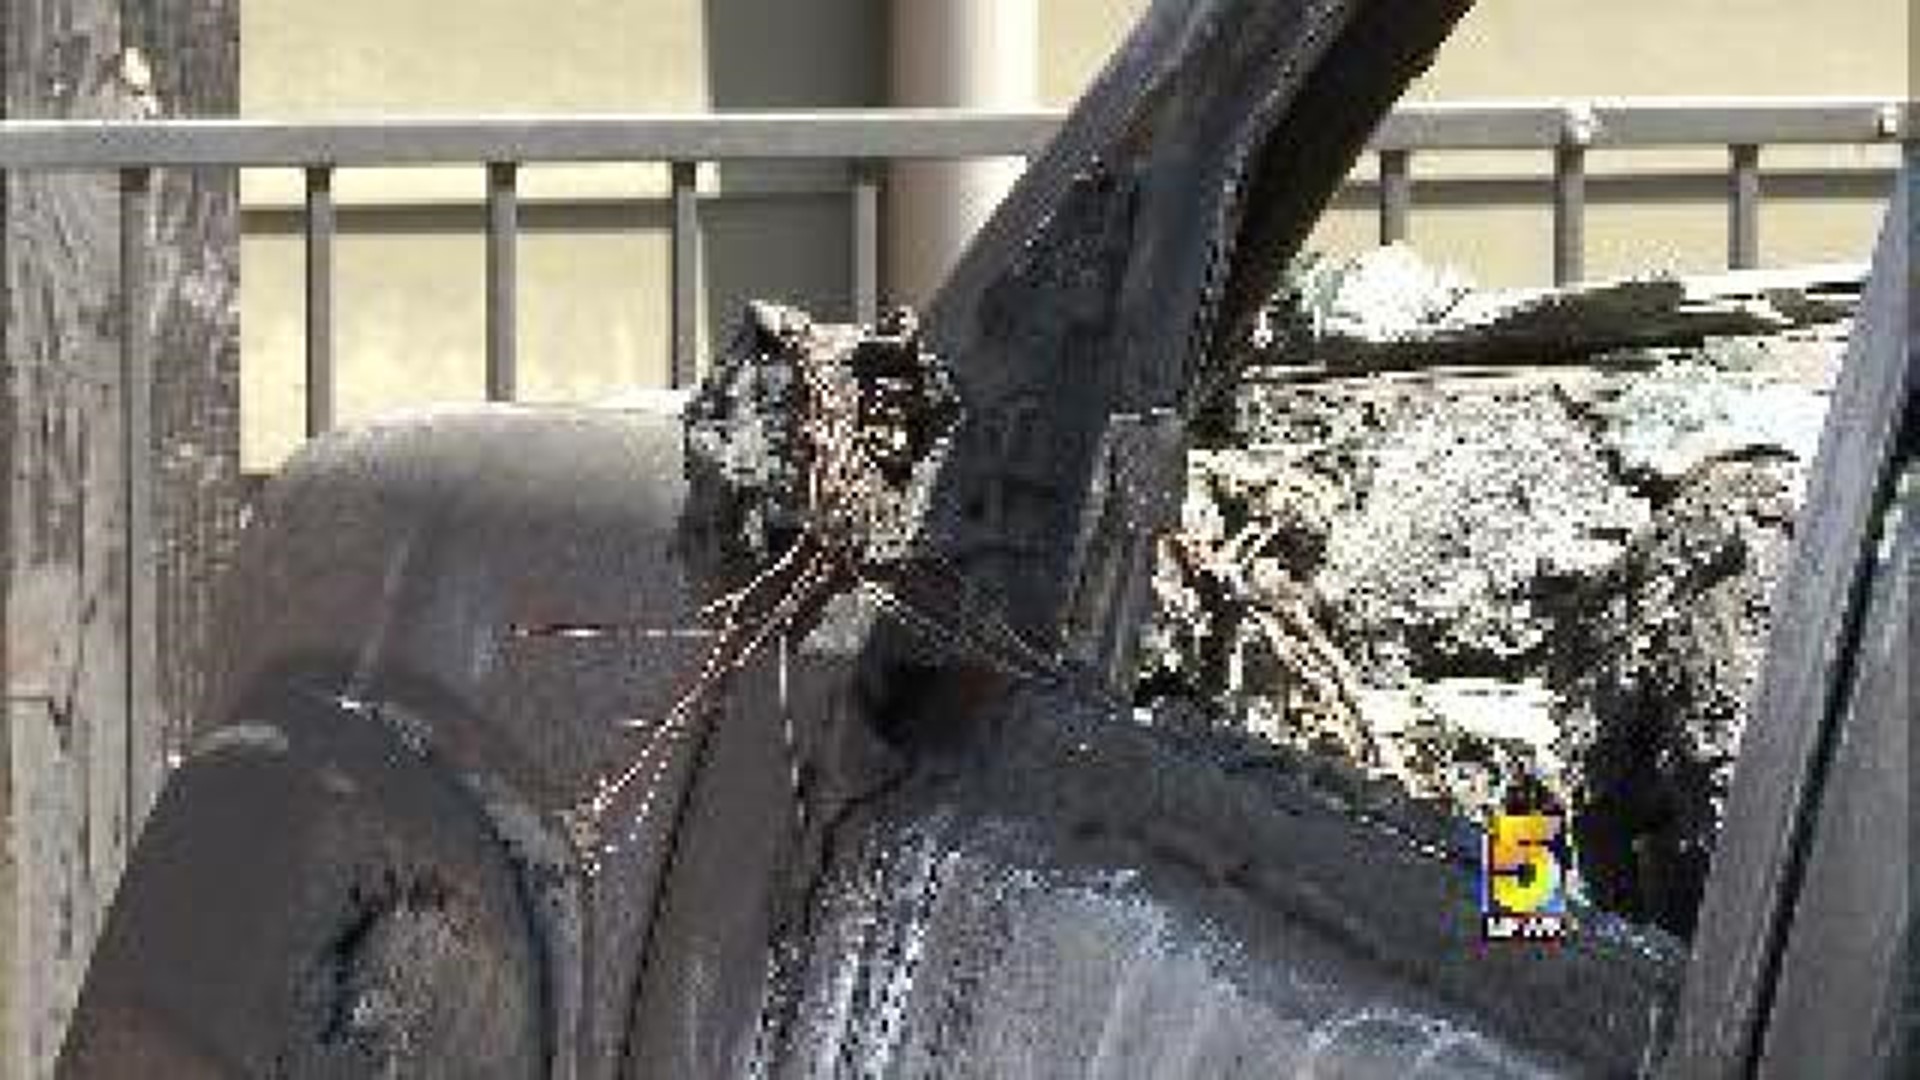 Landlord To Install Cameras After Car Fire